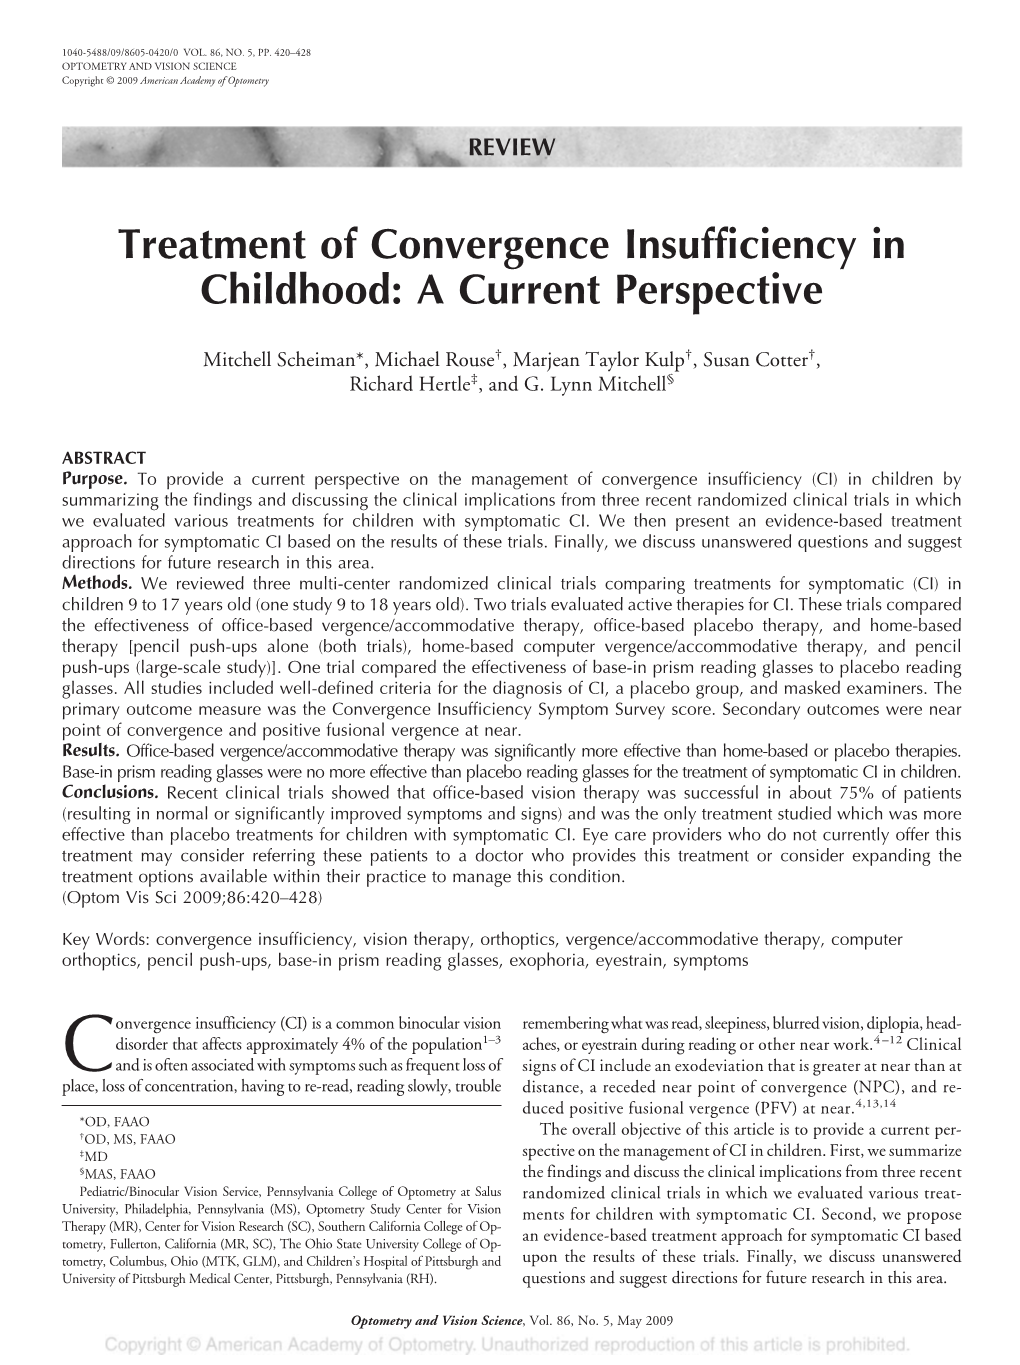 Treatment of Convergence Insufficiency in Childhood: a Current Perspective